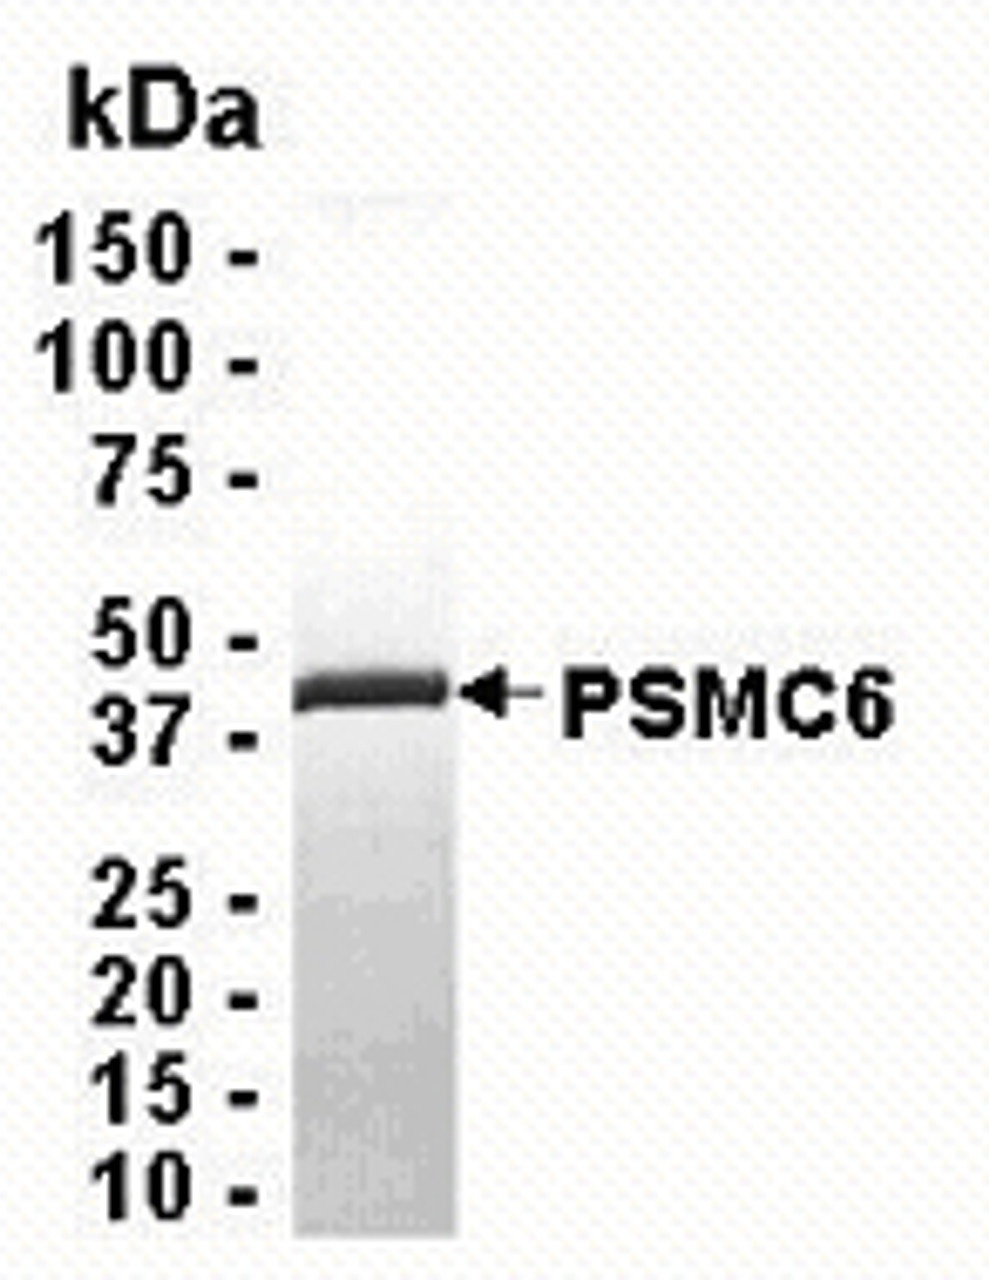 SDS PAGE: Analysis of PSMC6 Recombinant Protein. 4-20% SDS gradient gel. Coomassie blue staining.